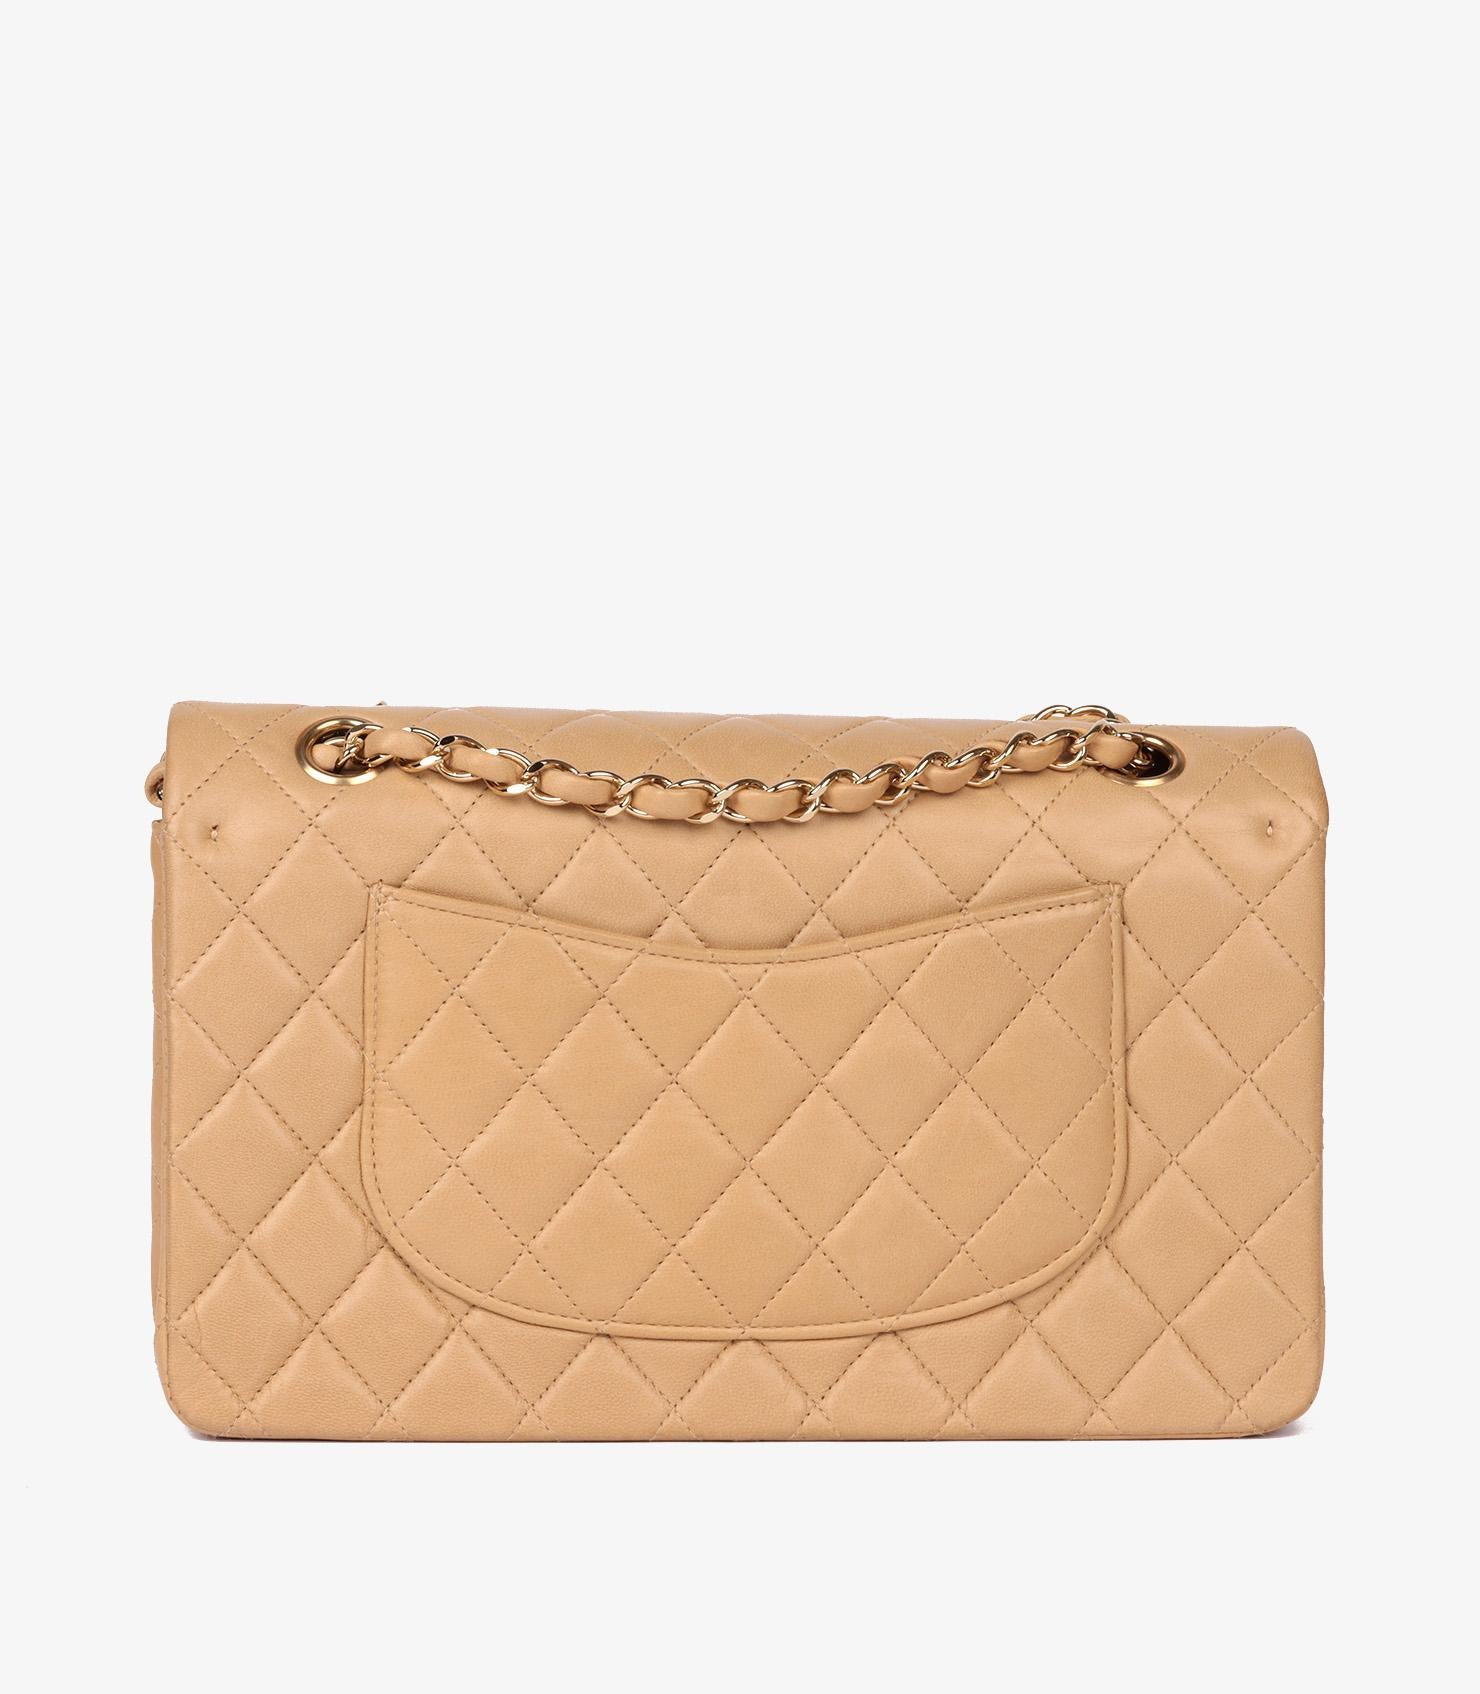 Chanel Beige Quilted Lambskin Vintage Medium Classic Double Flap Bag 3